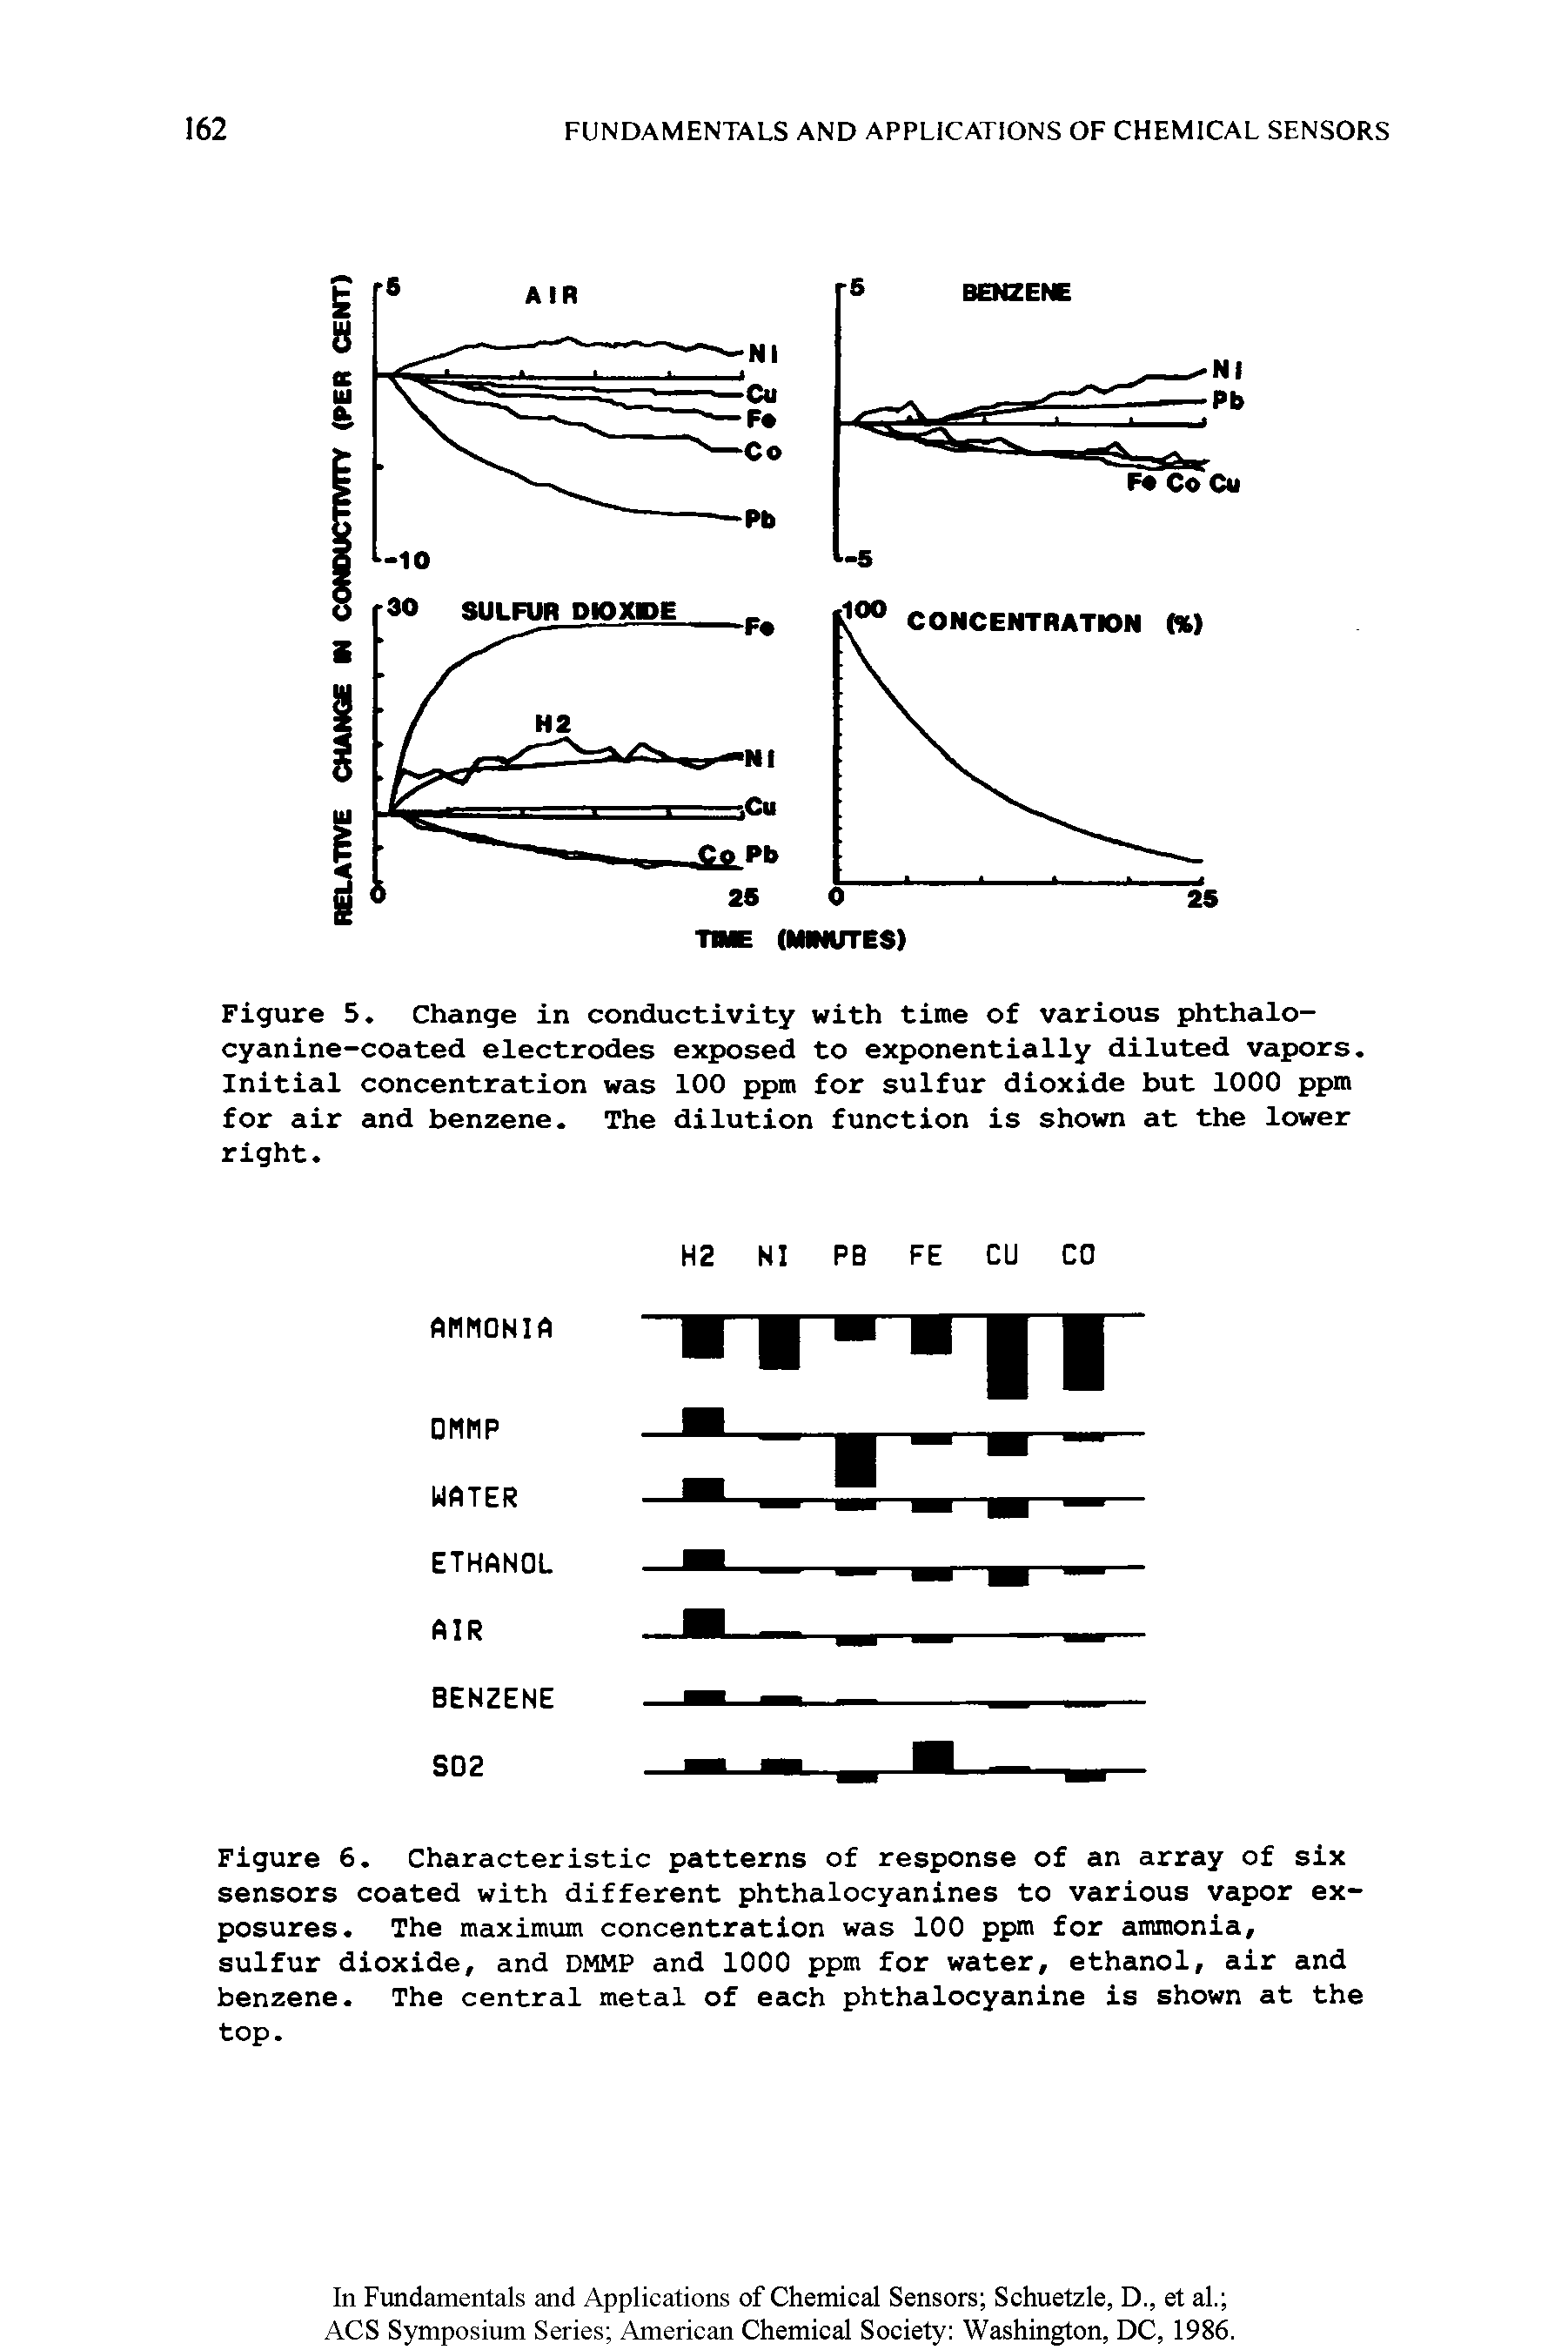 Figure 6. Characteristic patterns of response of an array of six sensors coated with different phthalocyanines to various vapor exposures. The maximum concentration was 100 ppm for ammonia, sulfur dioxide, and DMMP and 1000 ppm for water, ethanol, air and benzene. The central metal of each phthalocyanine is shown at the top.